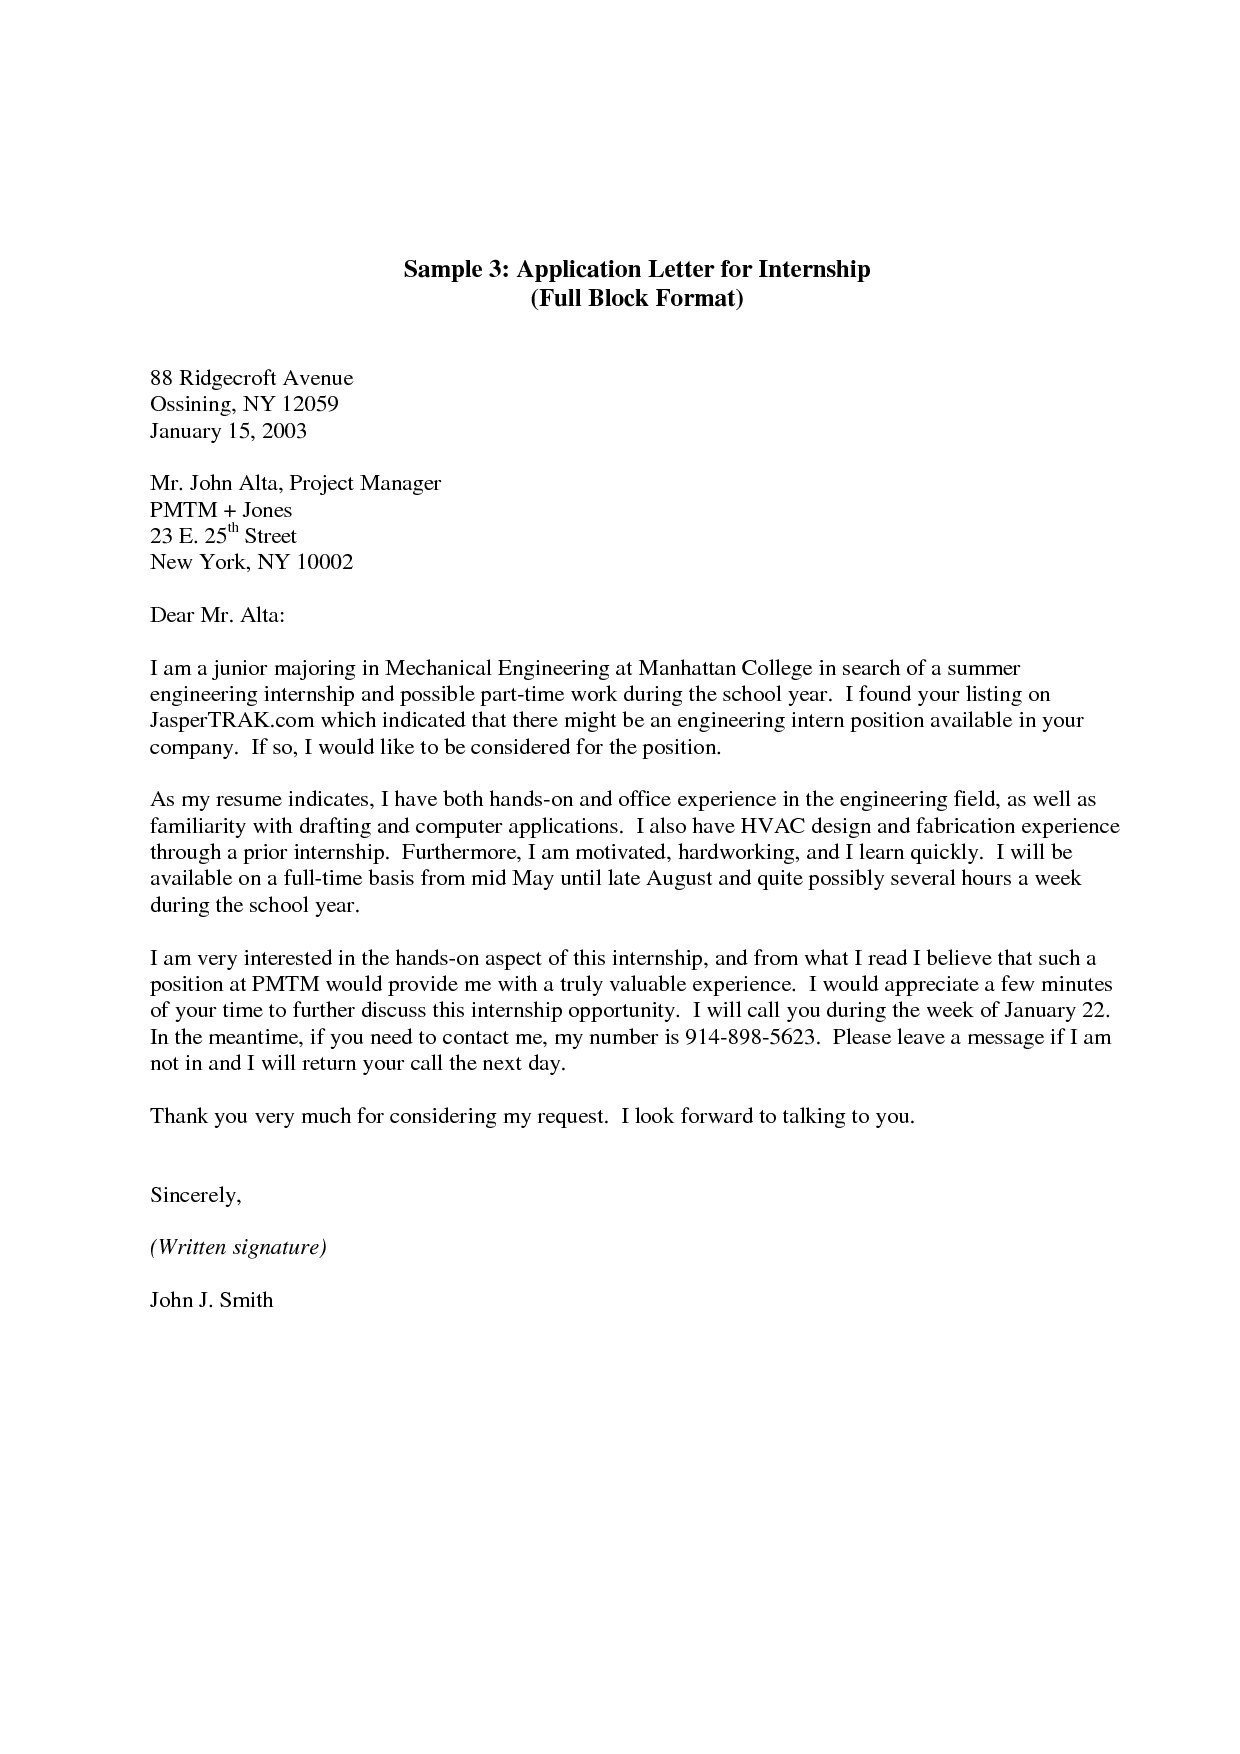 Scholarship Letter Of Recommendation Template - Job Letter Re Mendation Valid Letter Re Mendation for